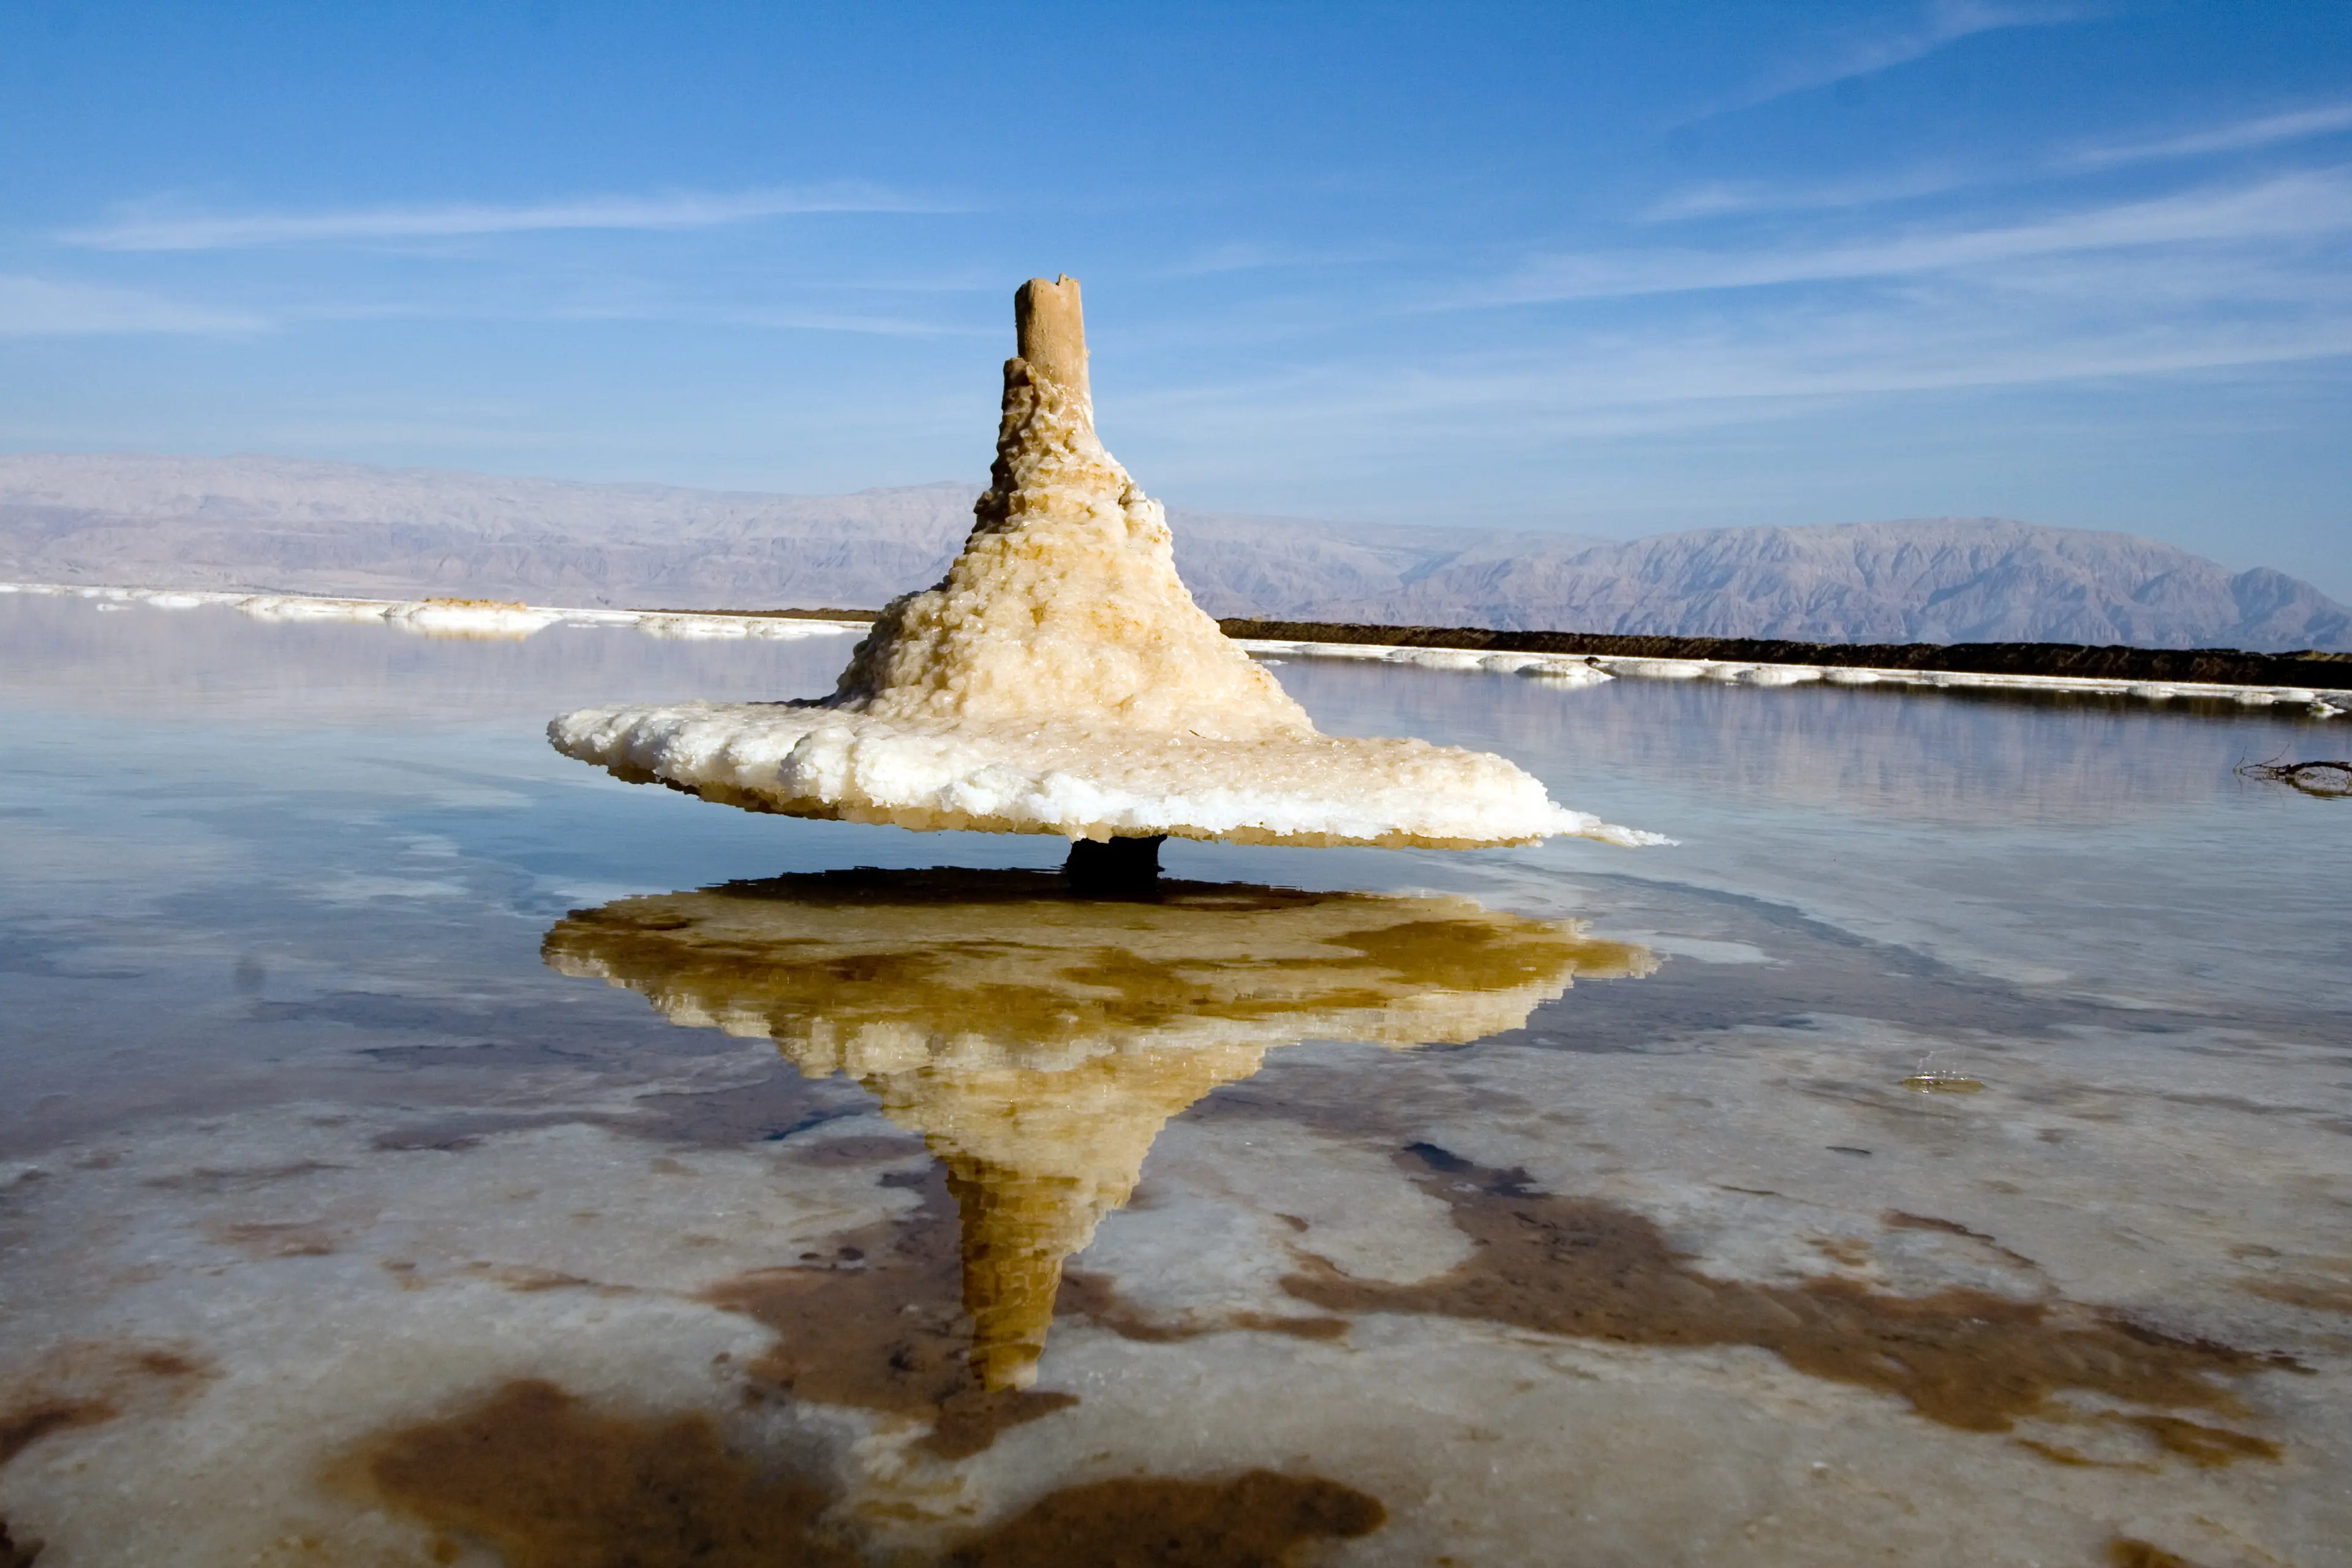 Thrilling 1-Day Outdoor Adventure at Israel's Dead Sea